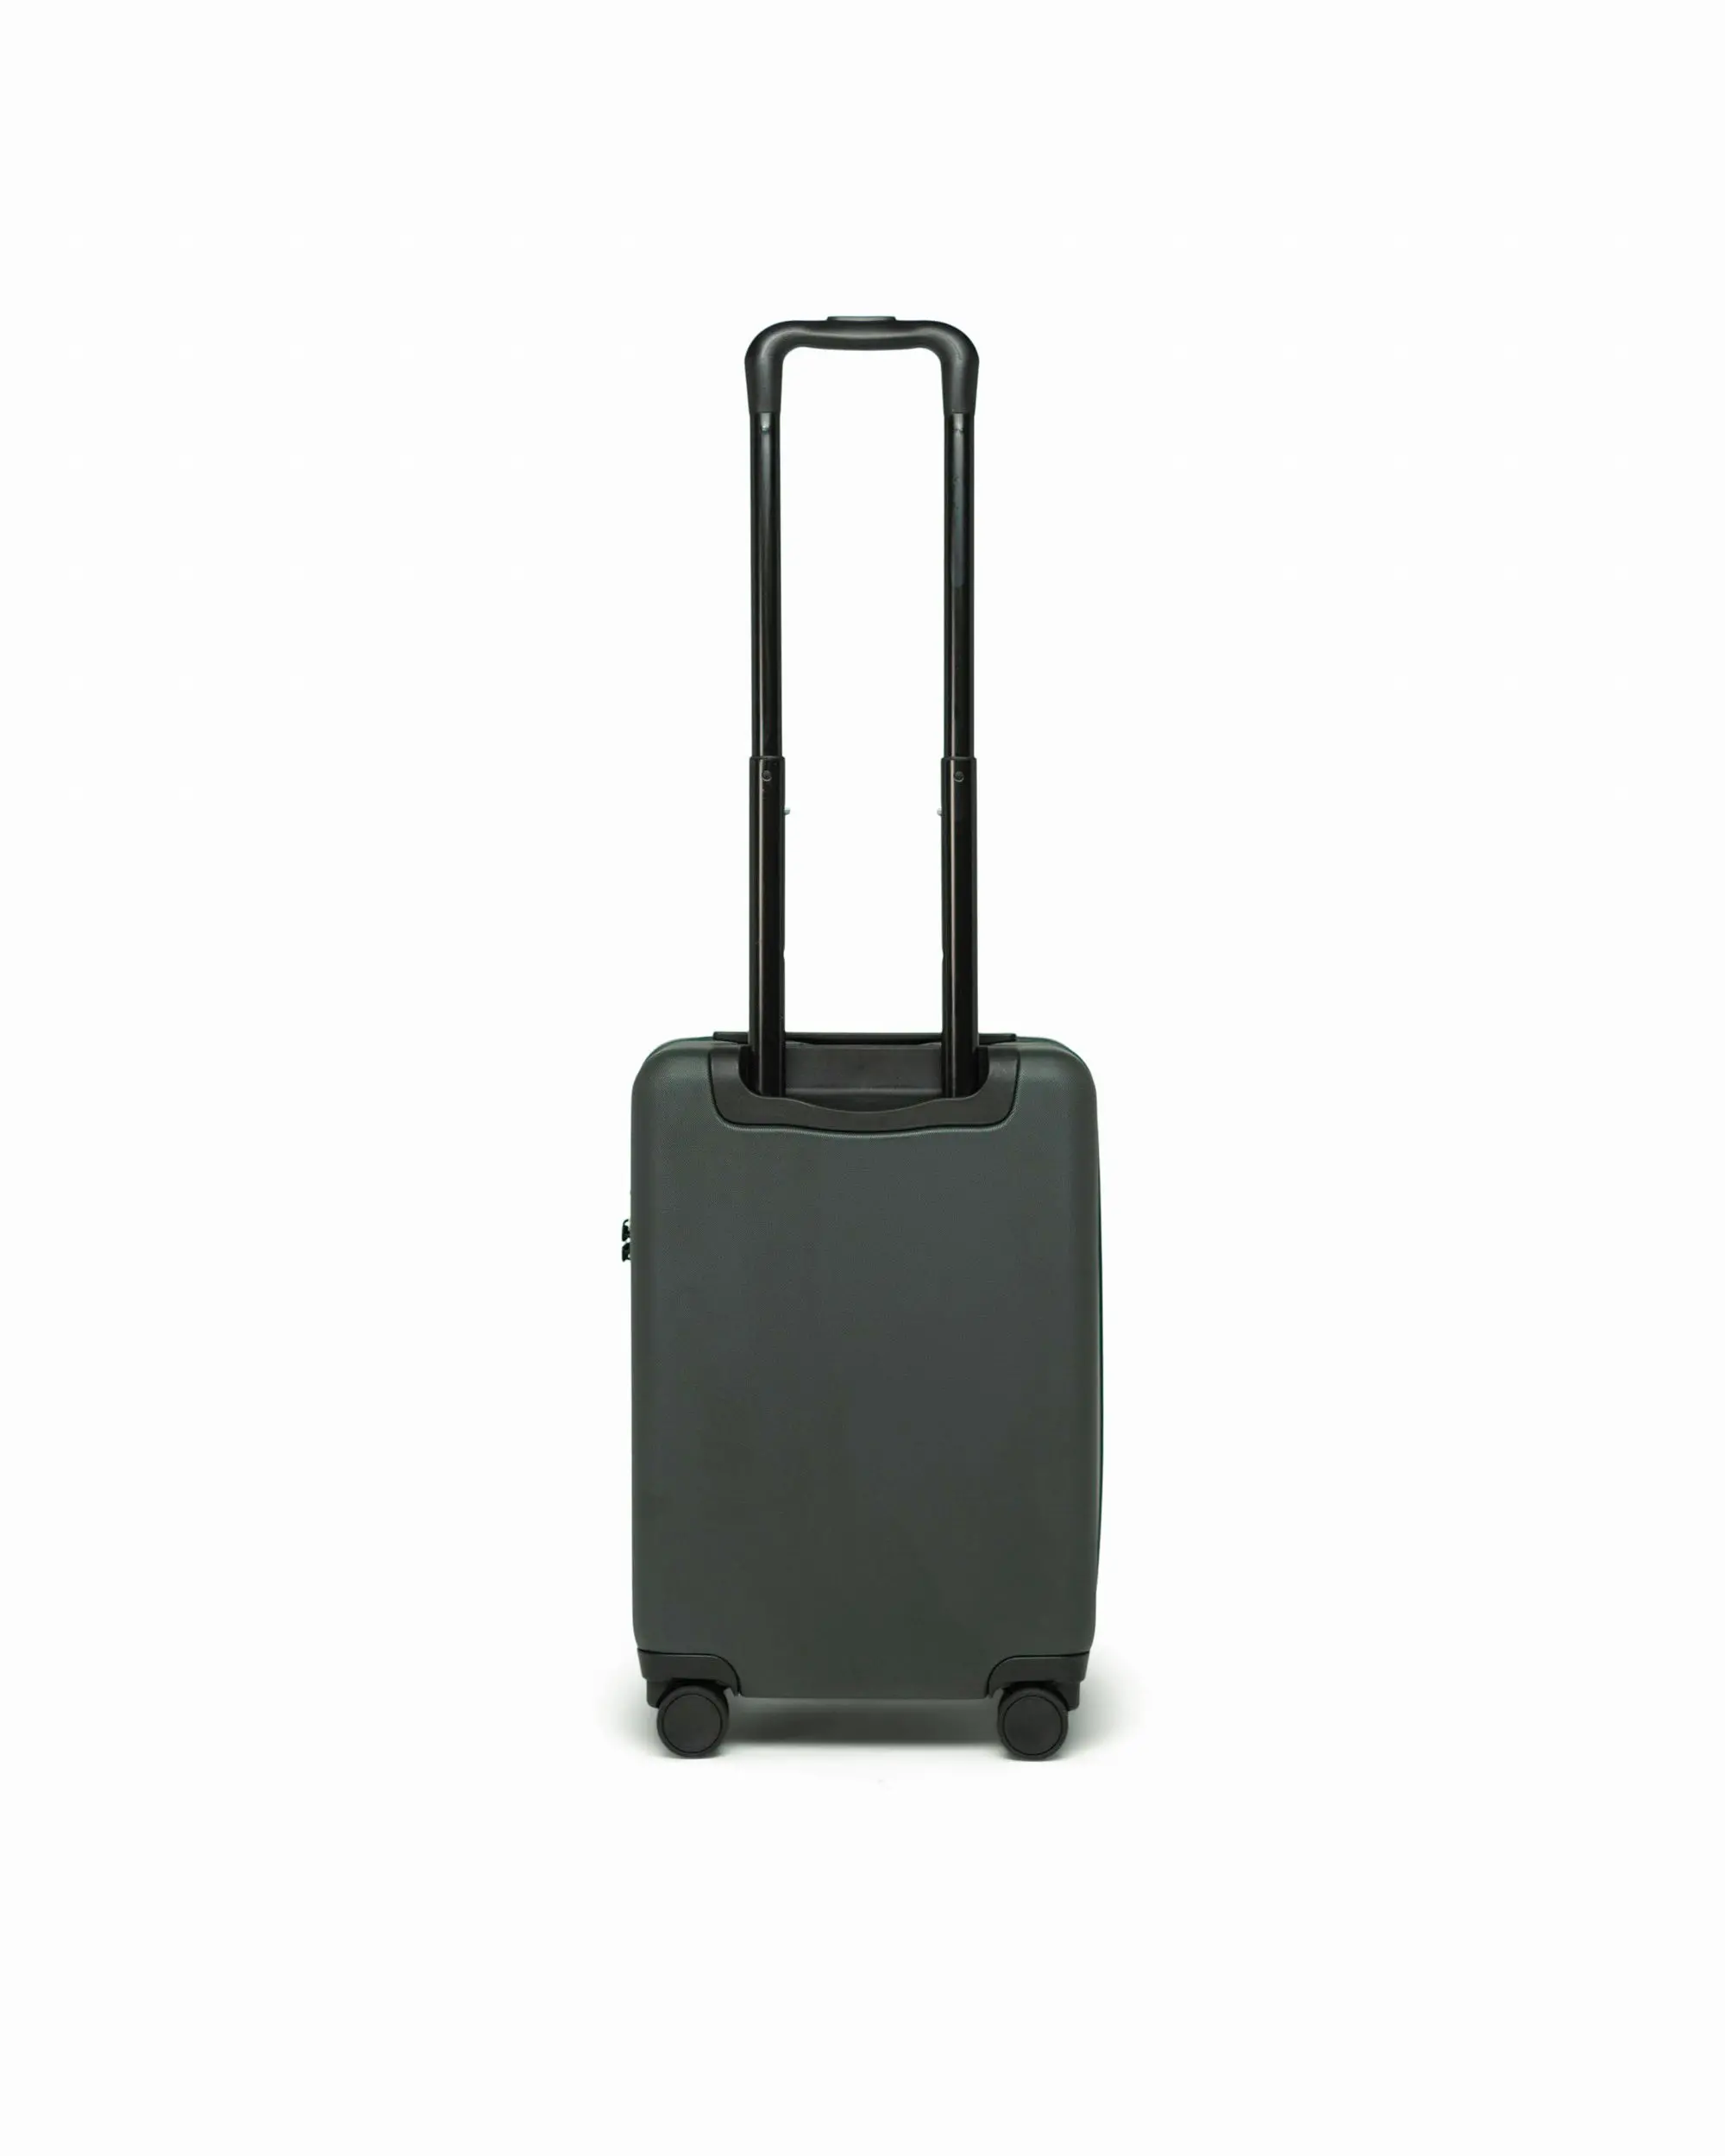 Shop Luggage Cover Protector Clear Pvc Suitca – Luggage Factory